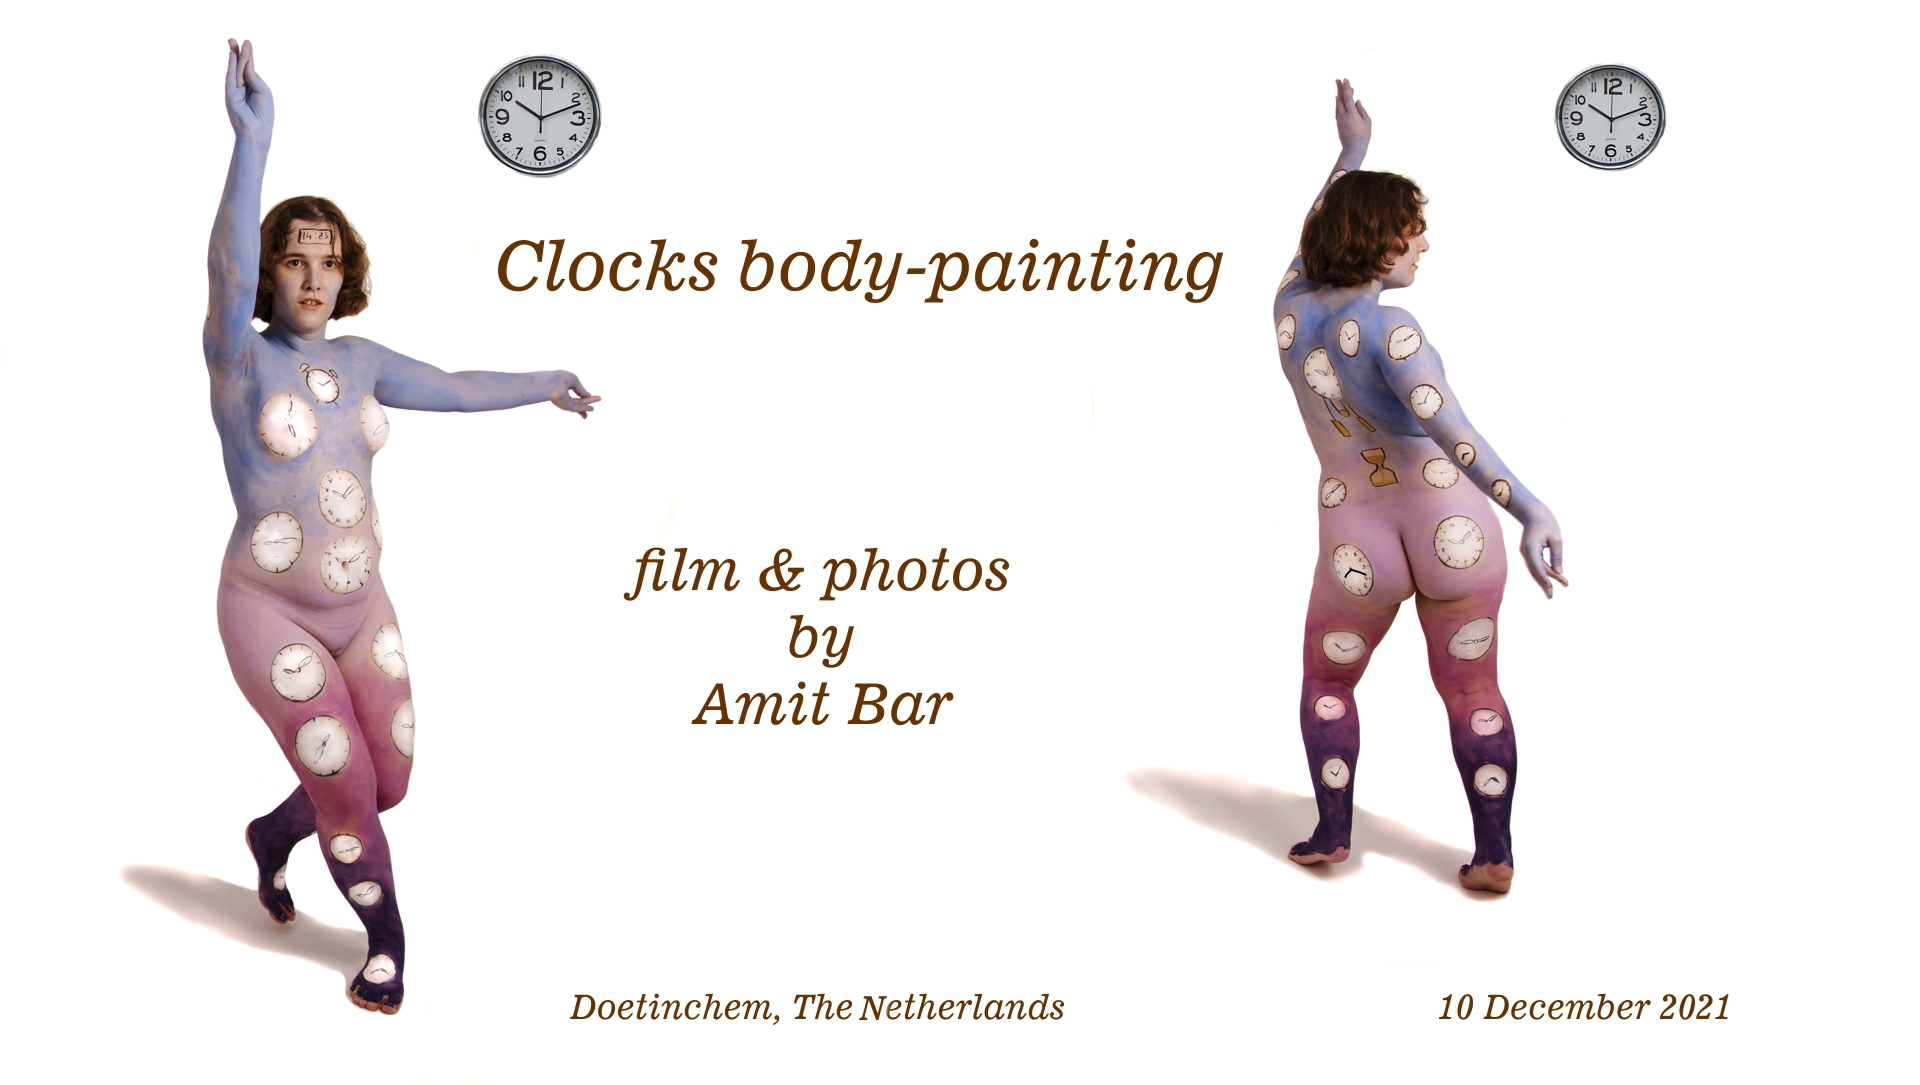 Clocks are in all formats and shapes, but up to now now not as a body-painting. It is therefore the world-wide premiere! Roxanne Giling is the dancer who gives the rhythm to the ticking of clocks.